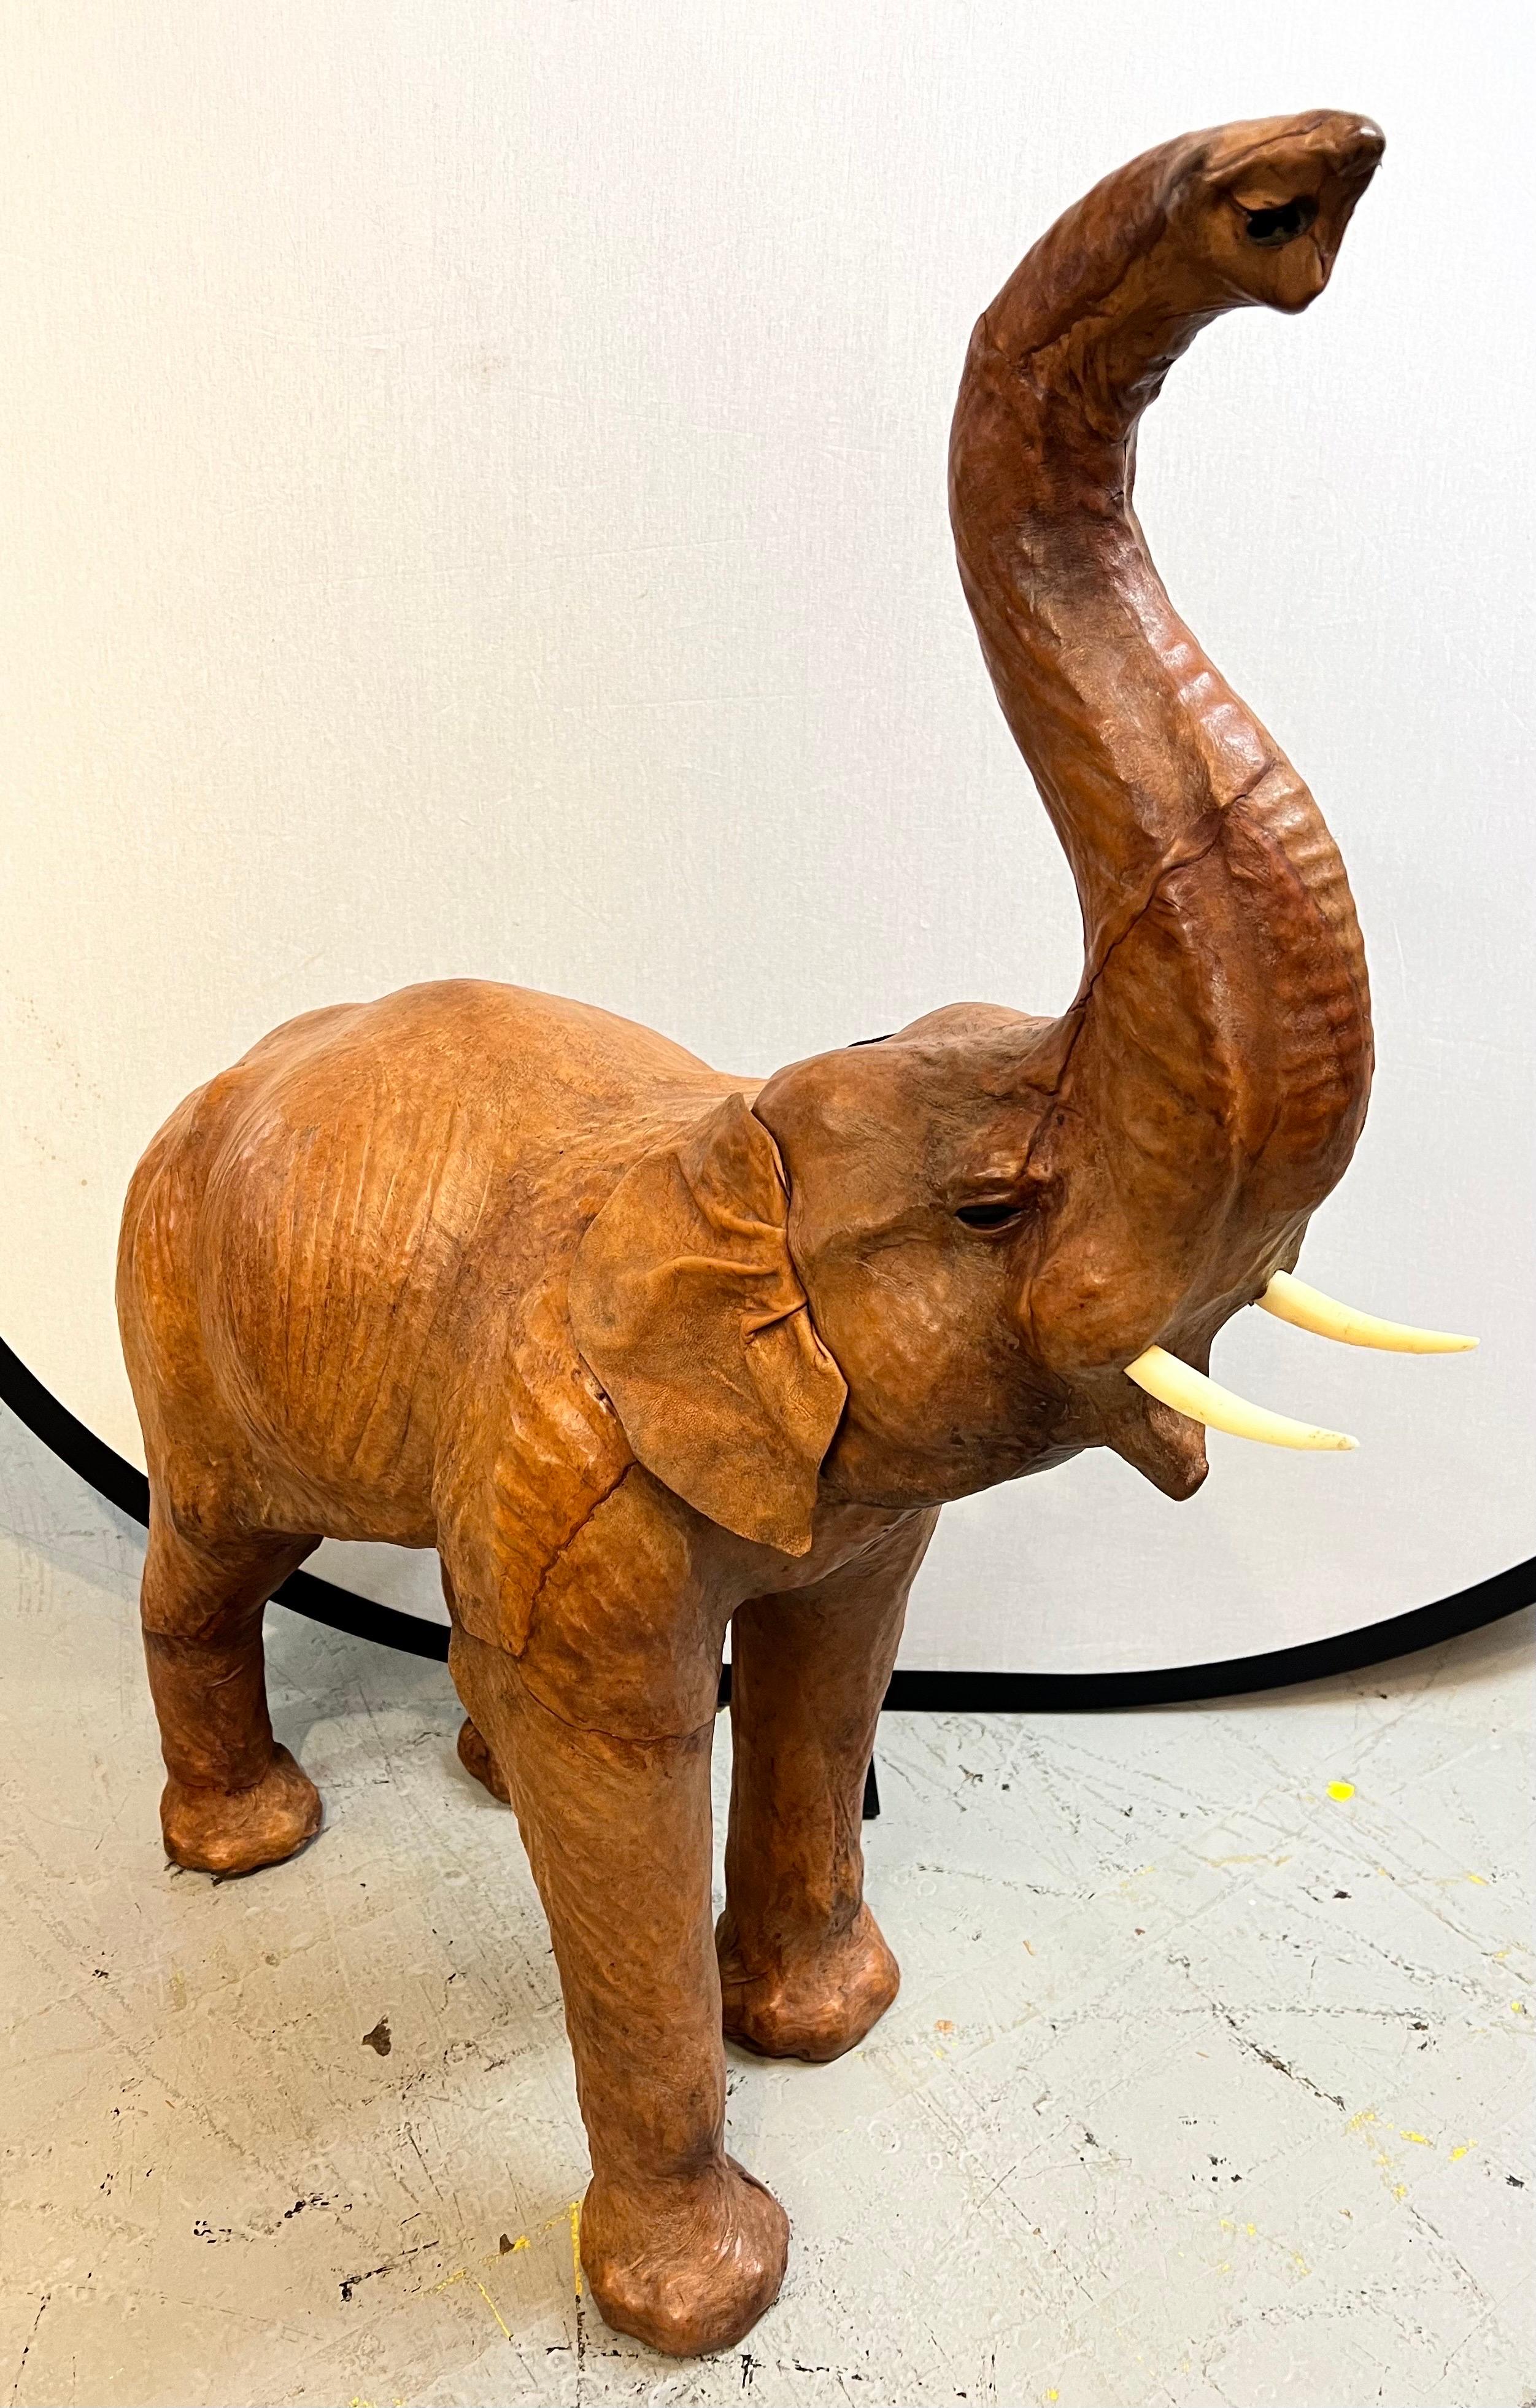 Stunning and unusual, due to its scale, is this leather elephant sculpture. The craftsmanship is impeccable and it stands 38